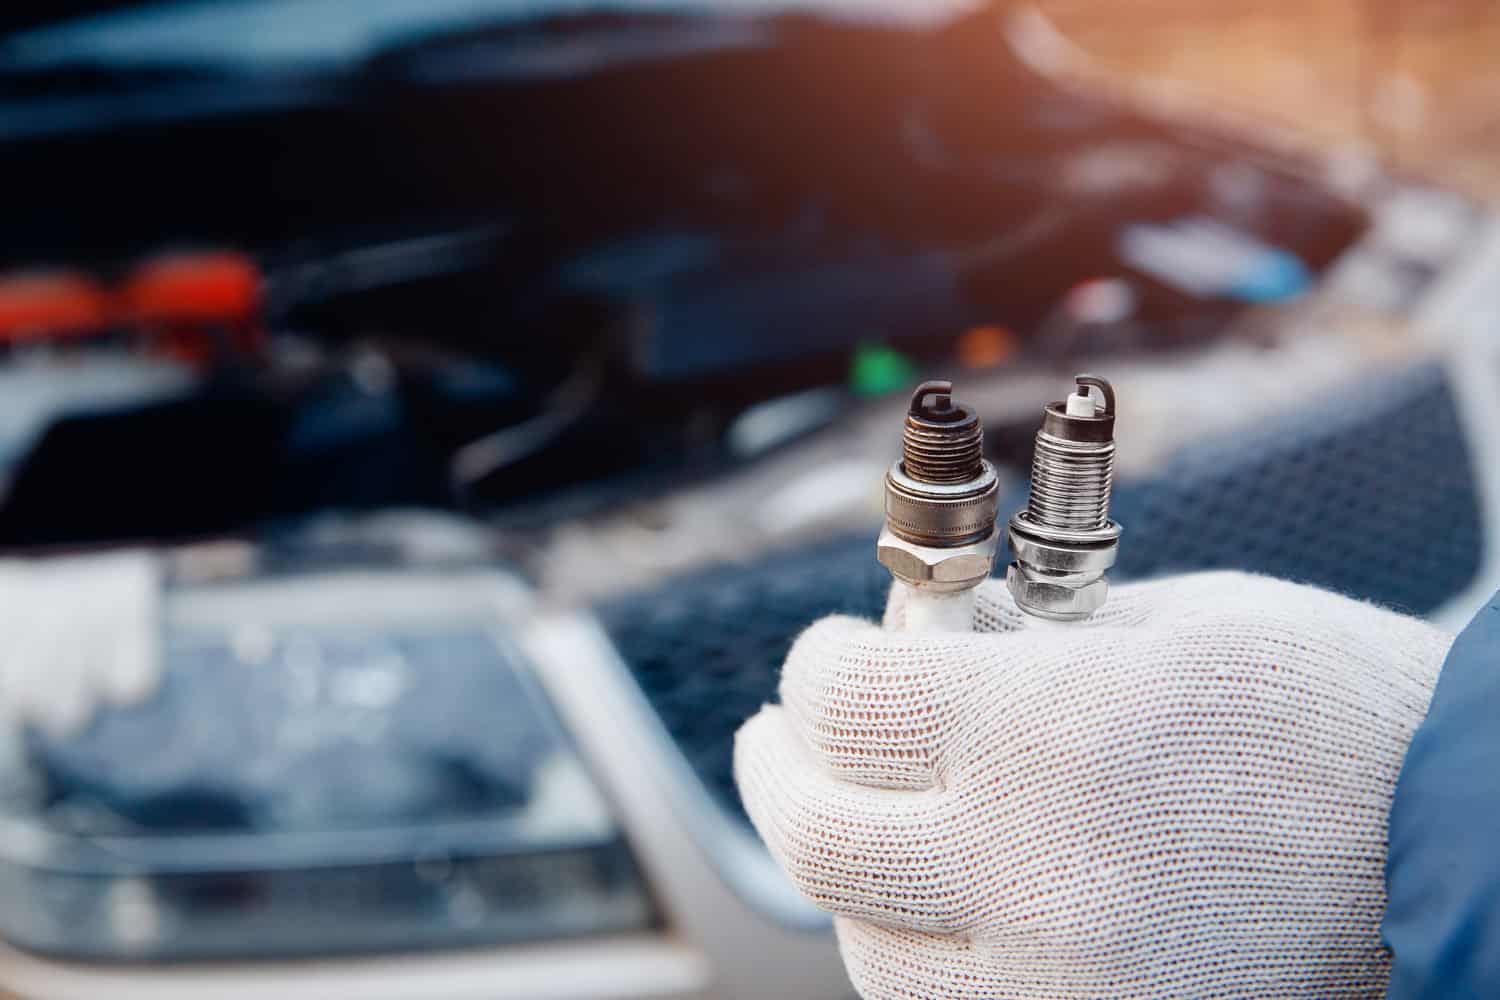 How to Change Your Spark Plugs